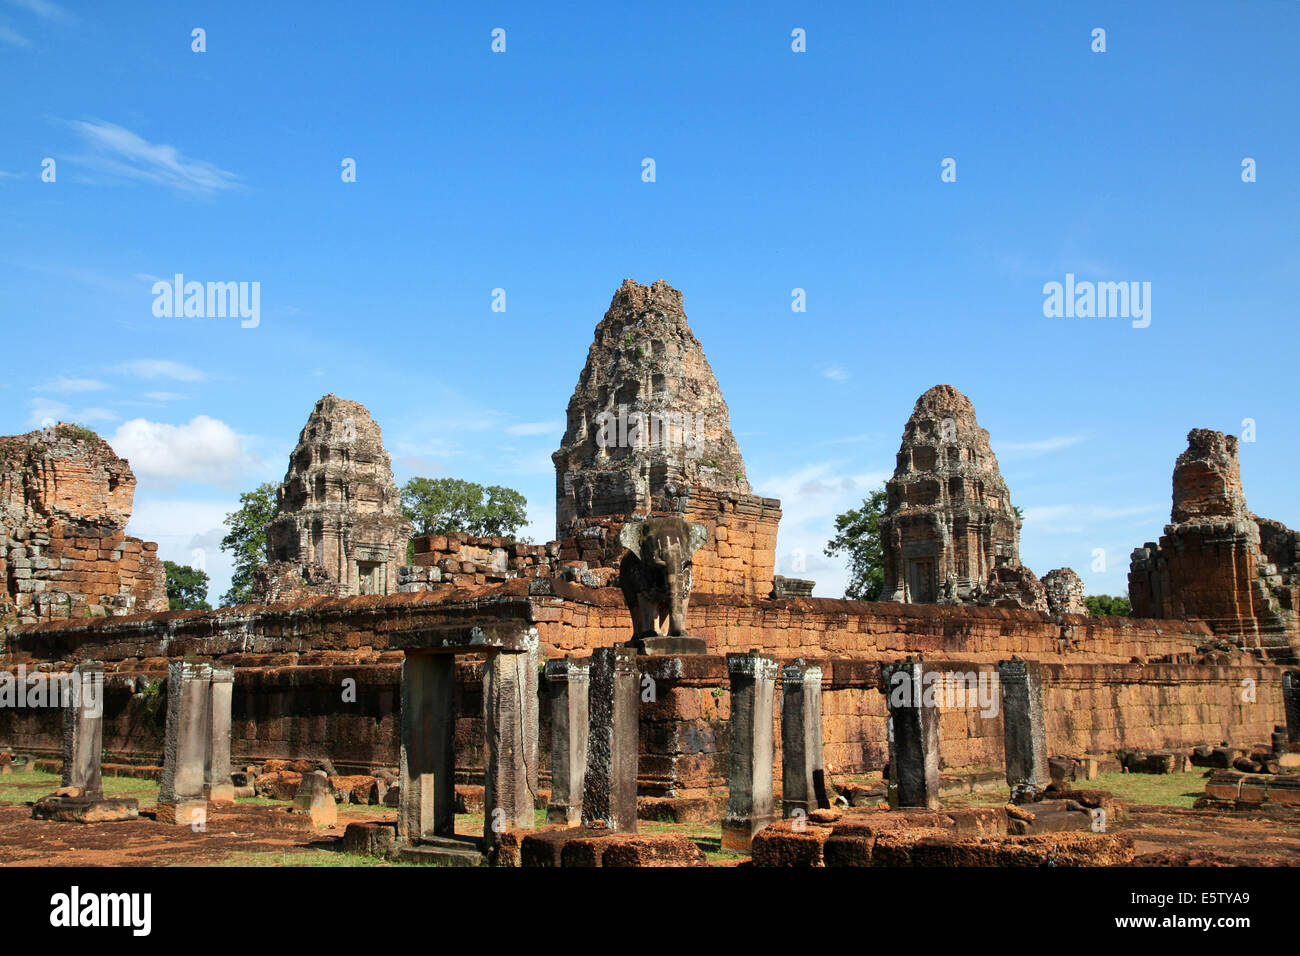 Angkor Wat temple complex in Cambodia Stock Photo